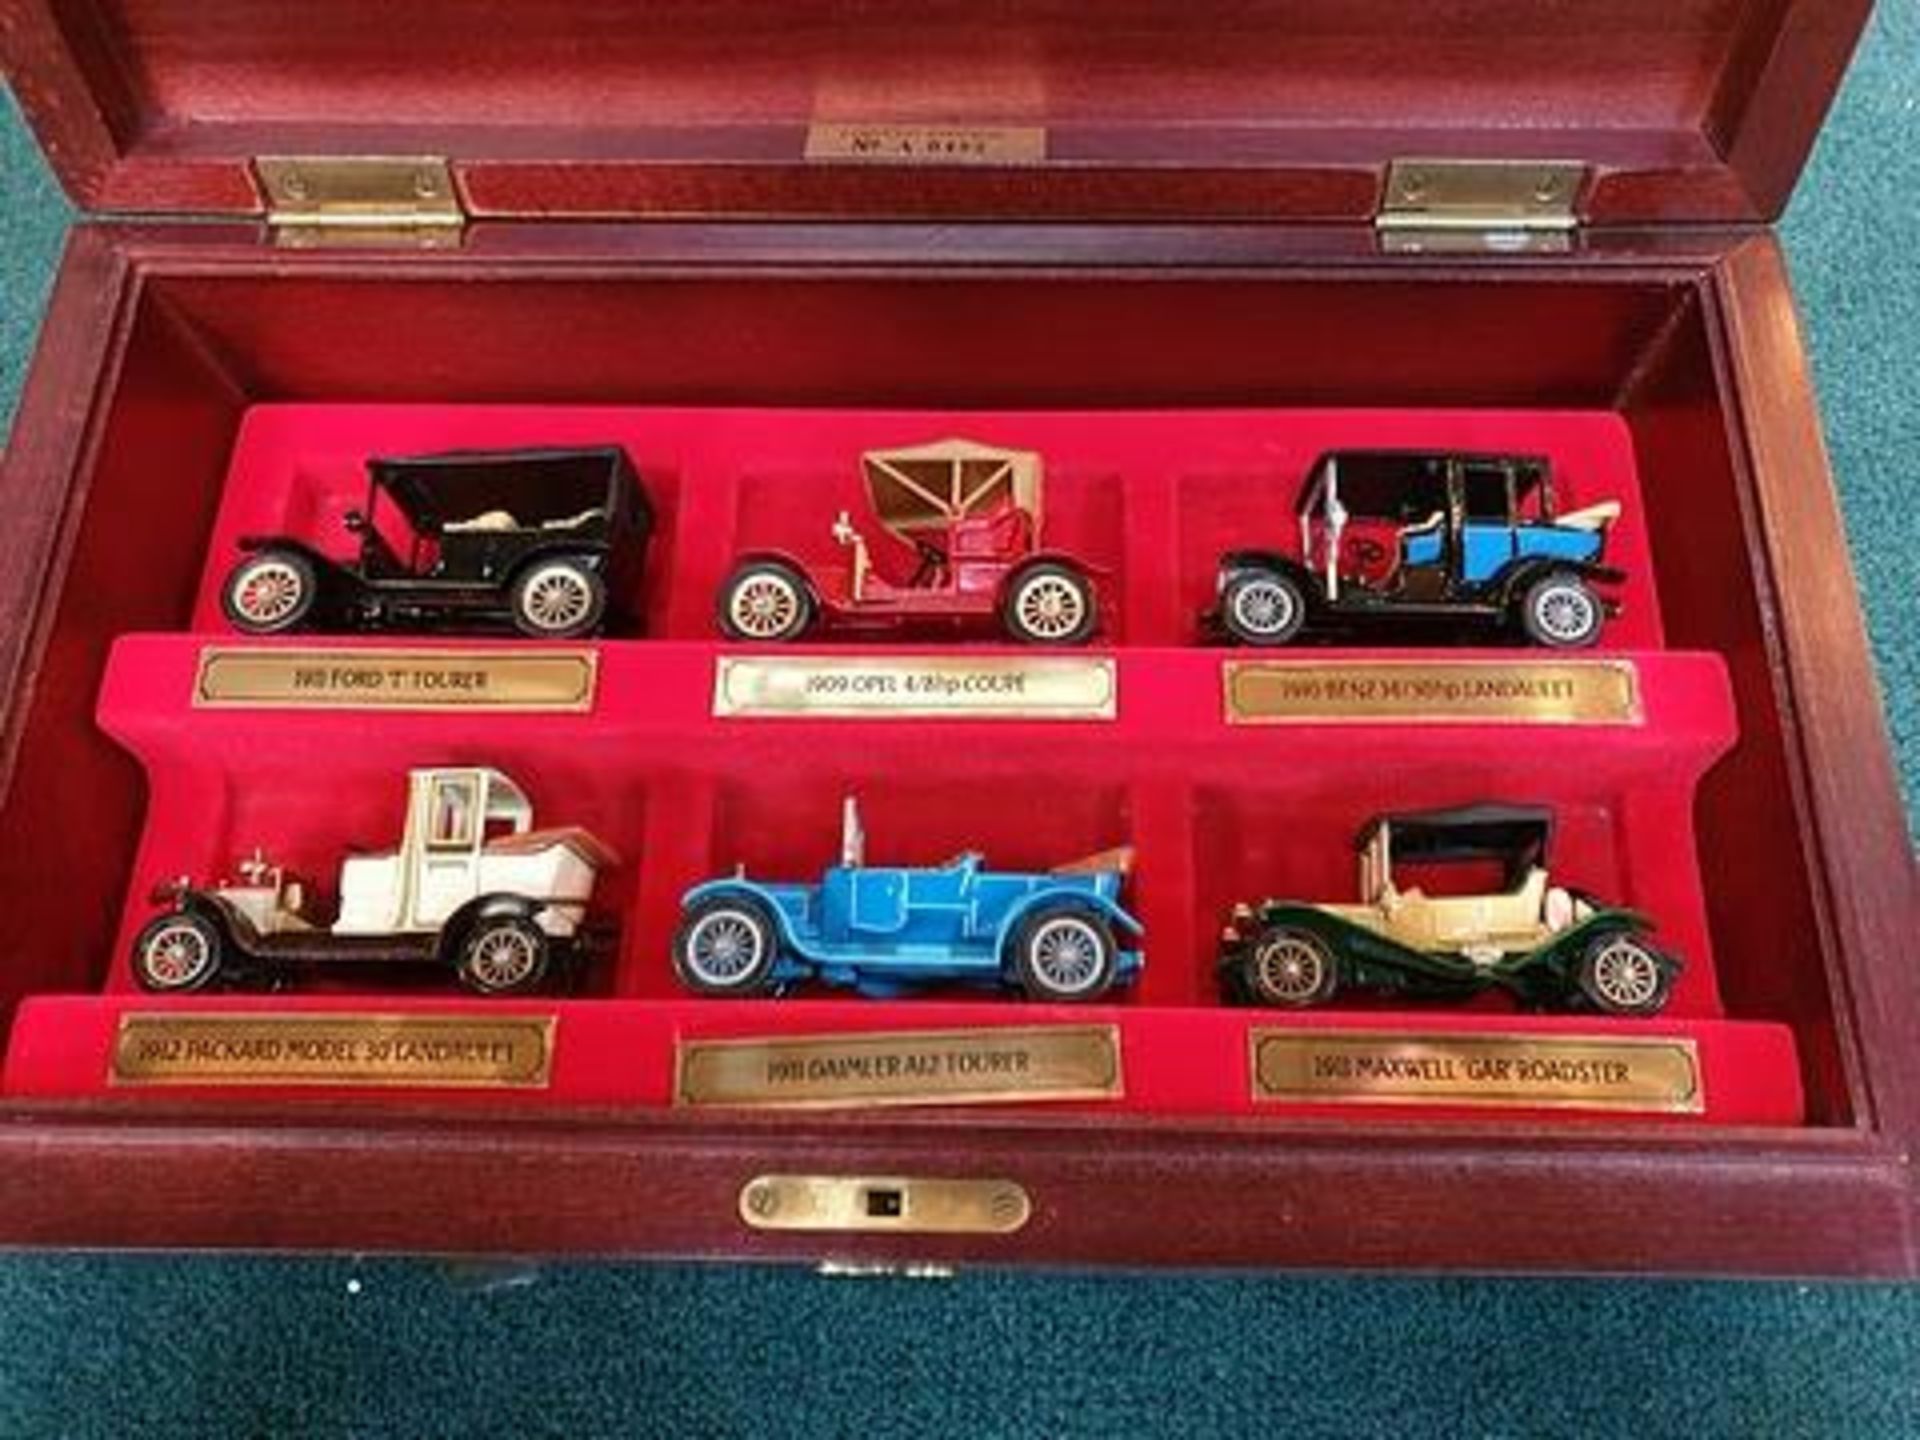 Matchbox Models Of Yesteryear Yy60-27426 Connoisseurs Collection 6 Limited Edition Set In Case - Image 2 of 2